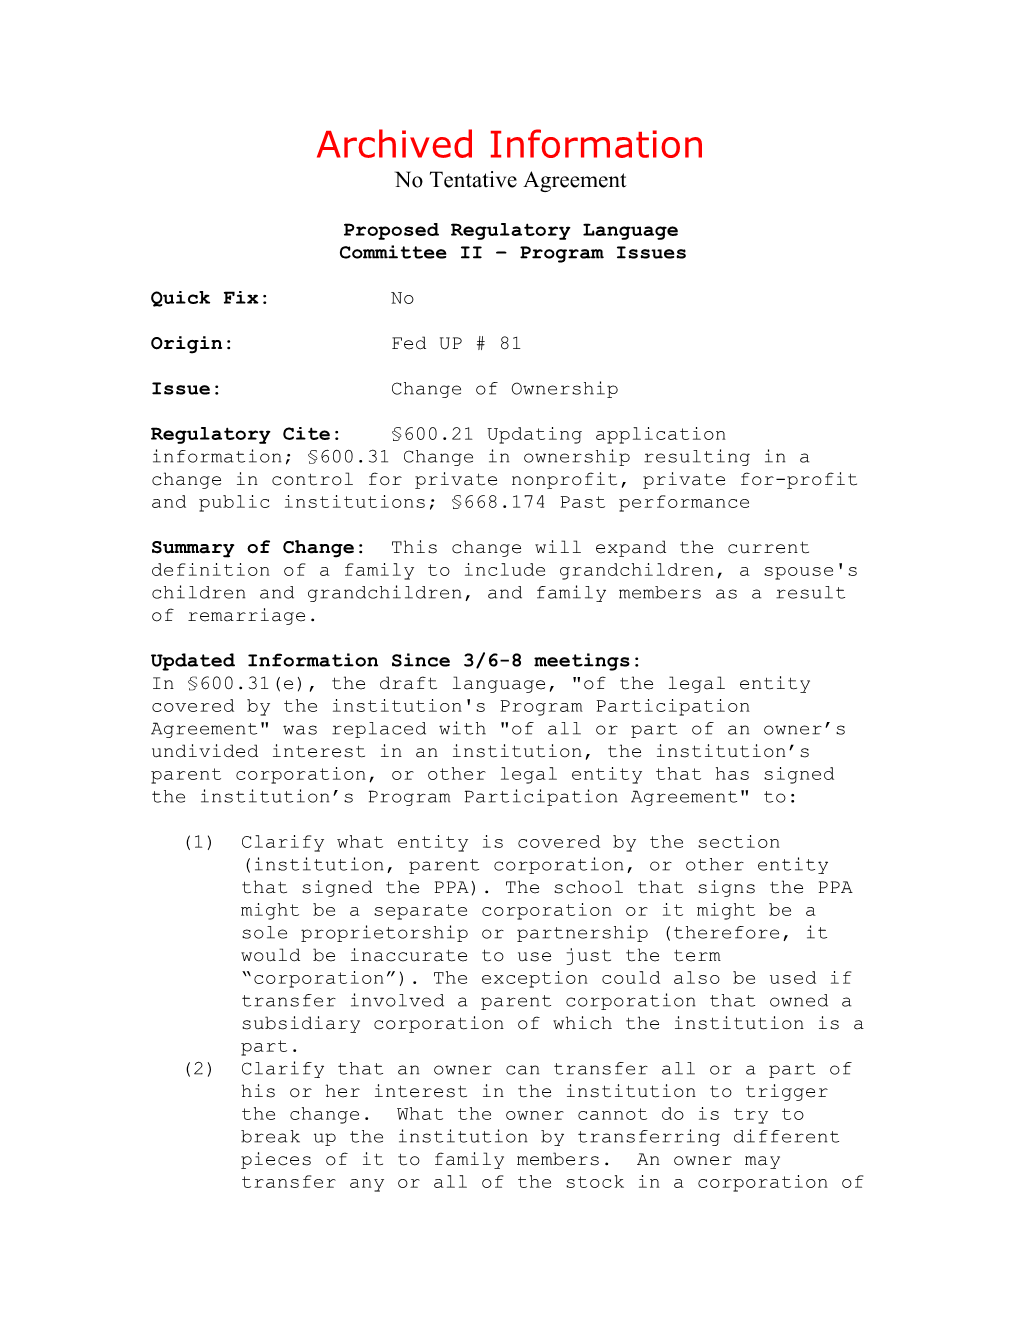 Archived: 2002 Negotiated Rulemaking - Program Issues - No Tentative Agreement (MS Word)